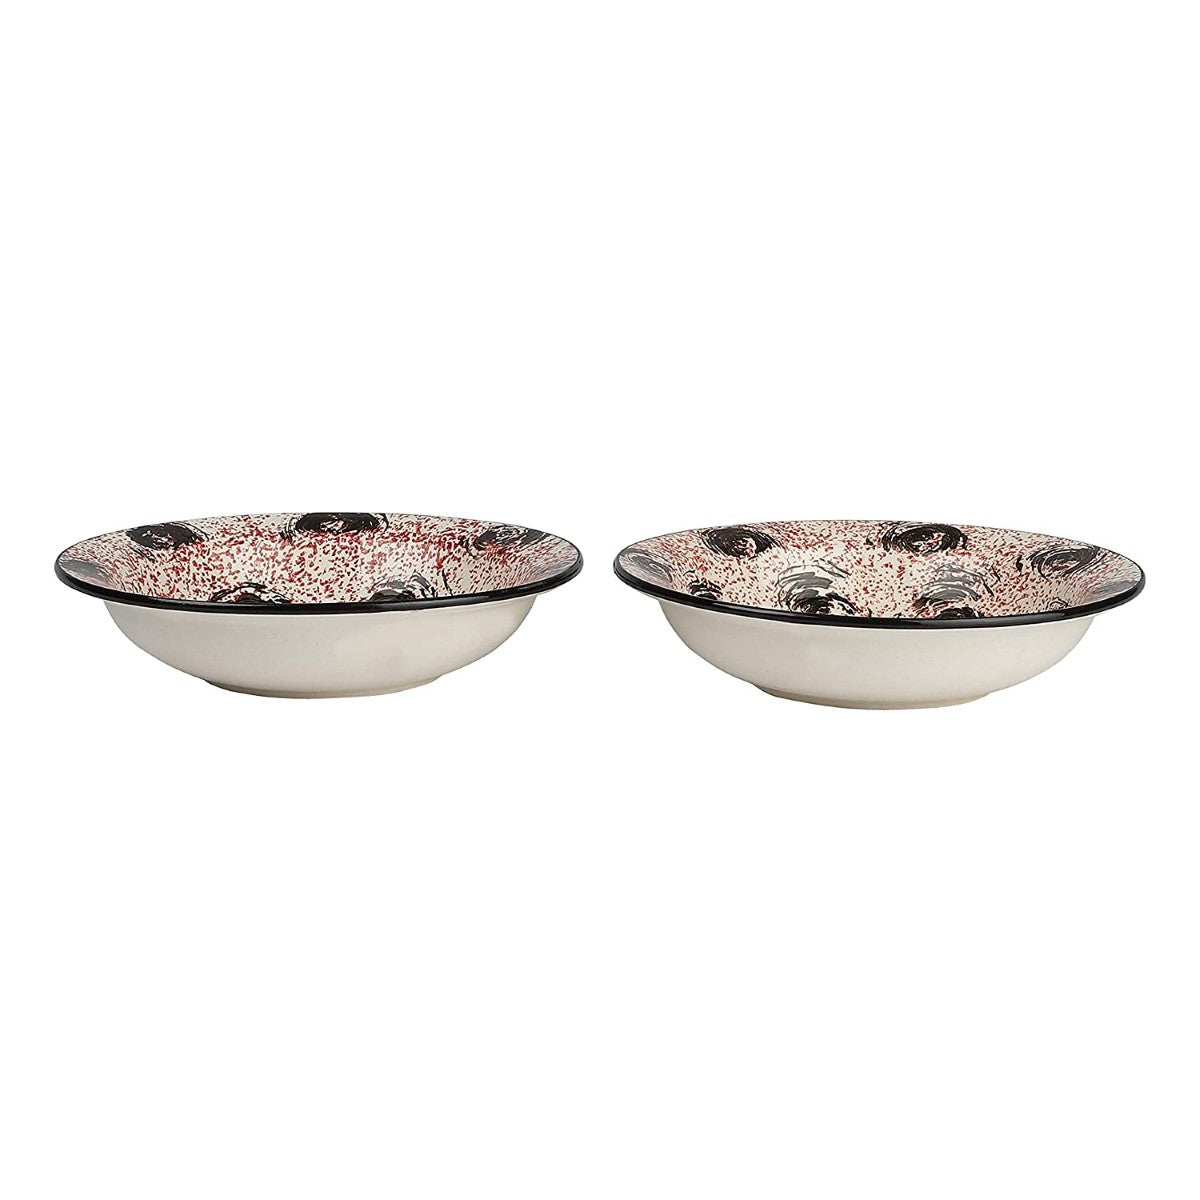 Black & Pink Color Ceramic Hand-Painted Pasta/Soup/Snack Plate(Set Of 2 Plates)